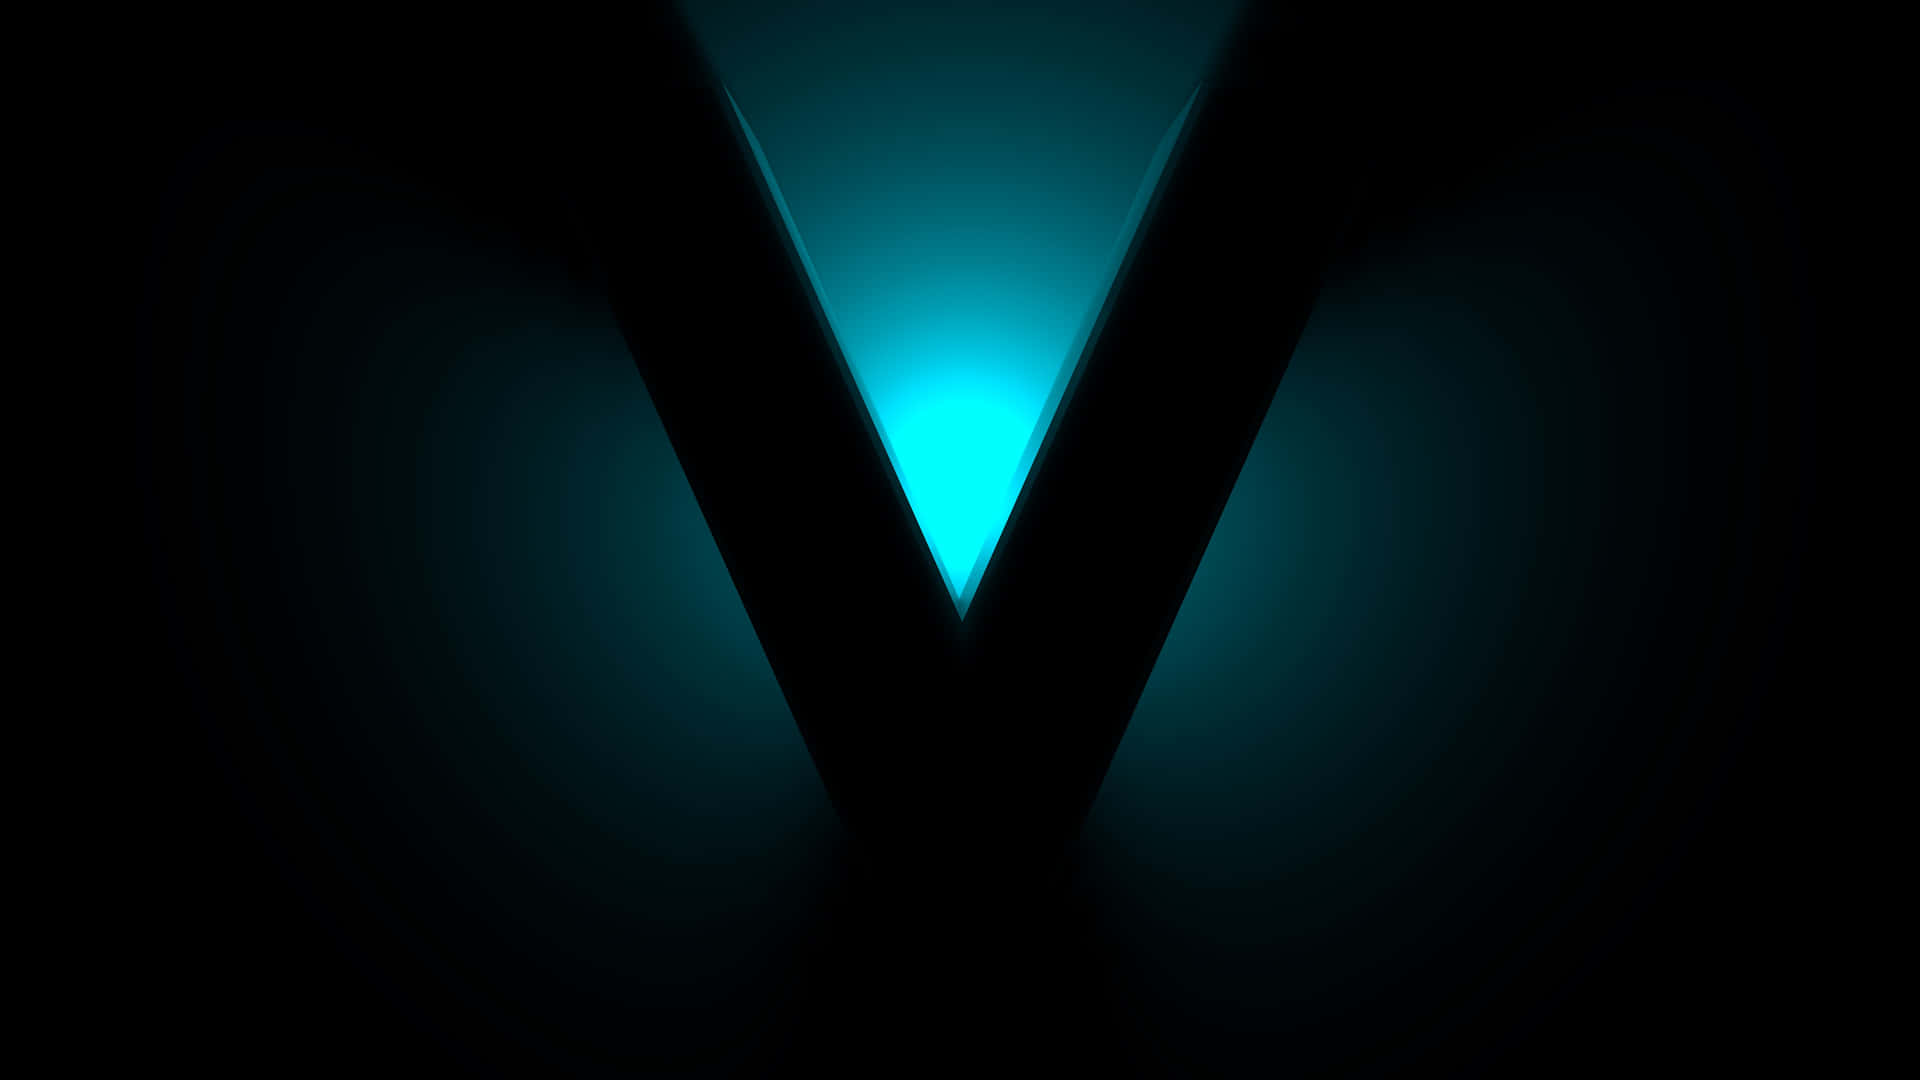 Dark Teal Abstract Background